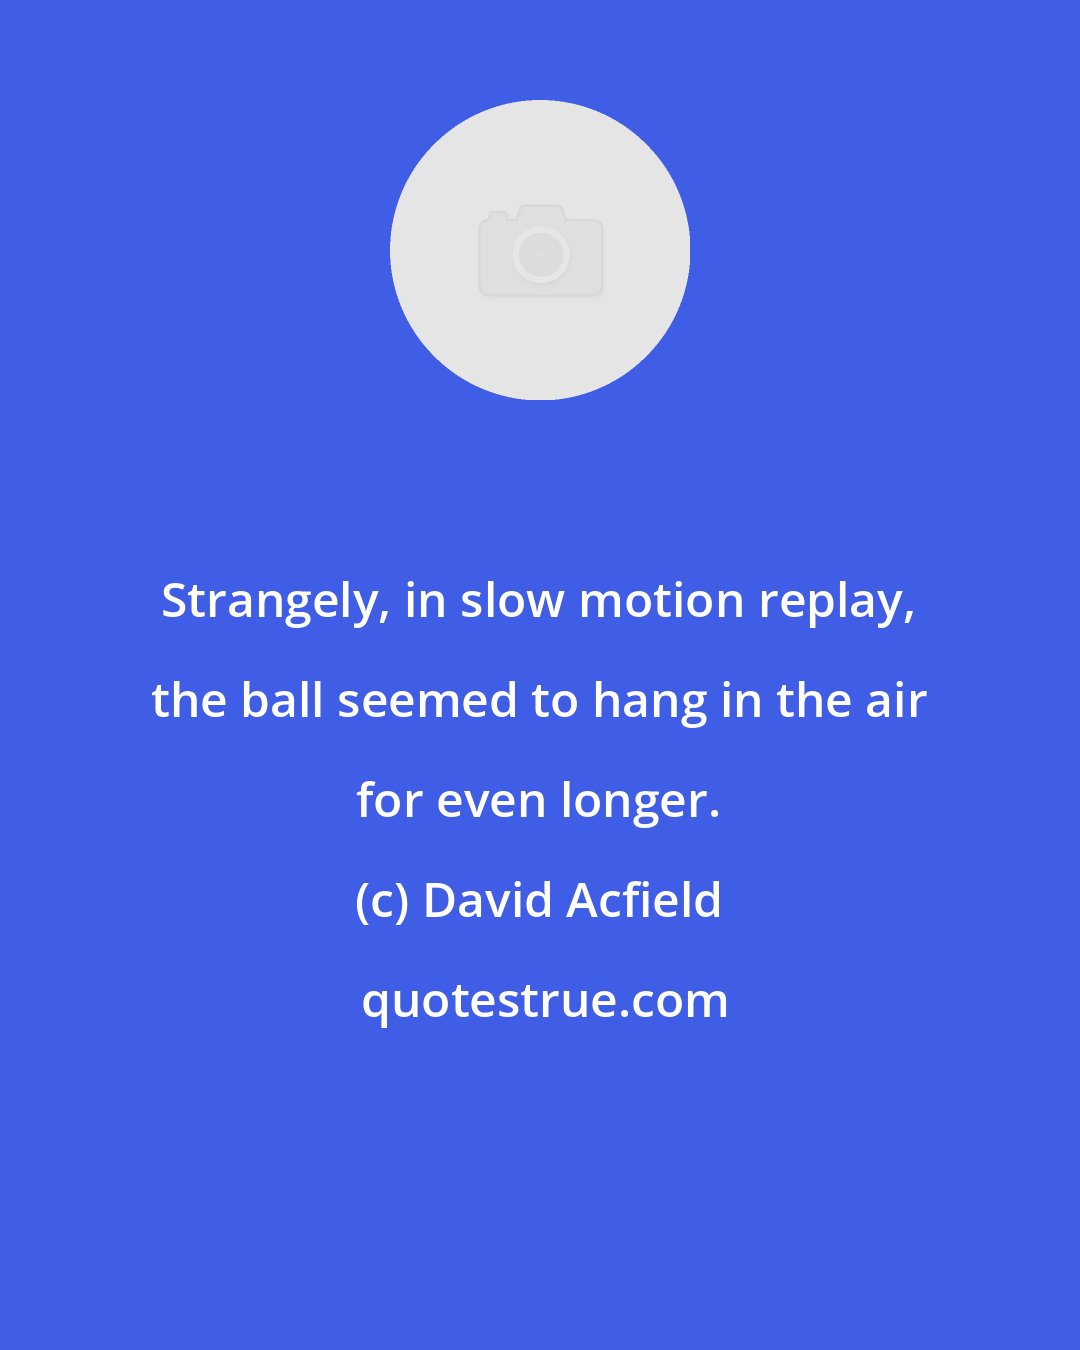 David Acfield: Strangely, in slow motion replay, the ball seemed to hang in the air for even longer.